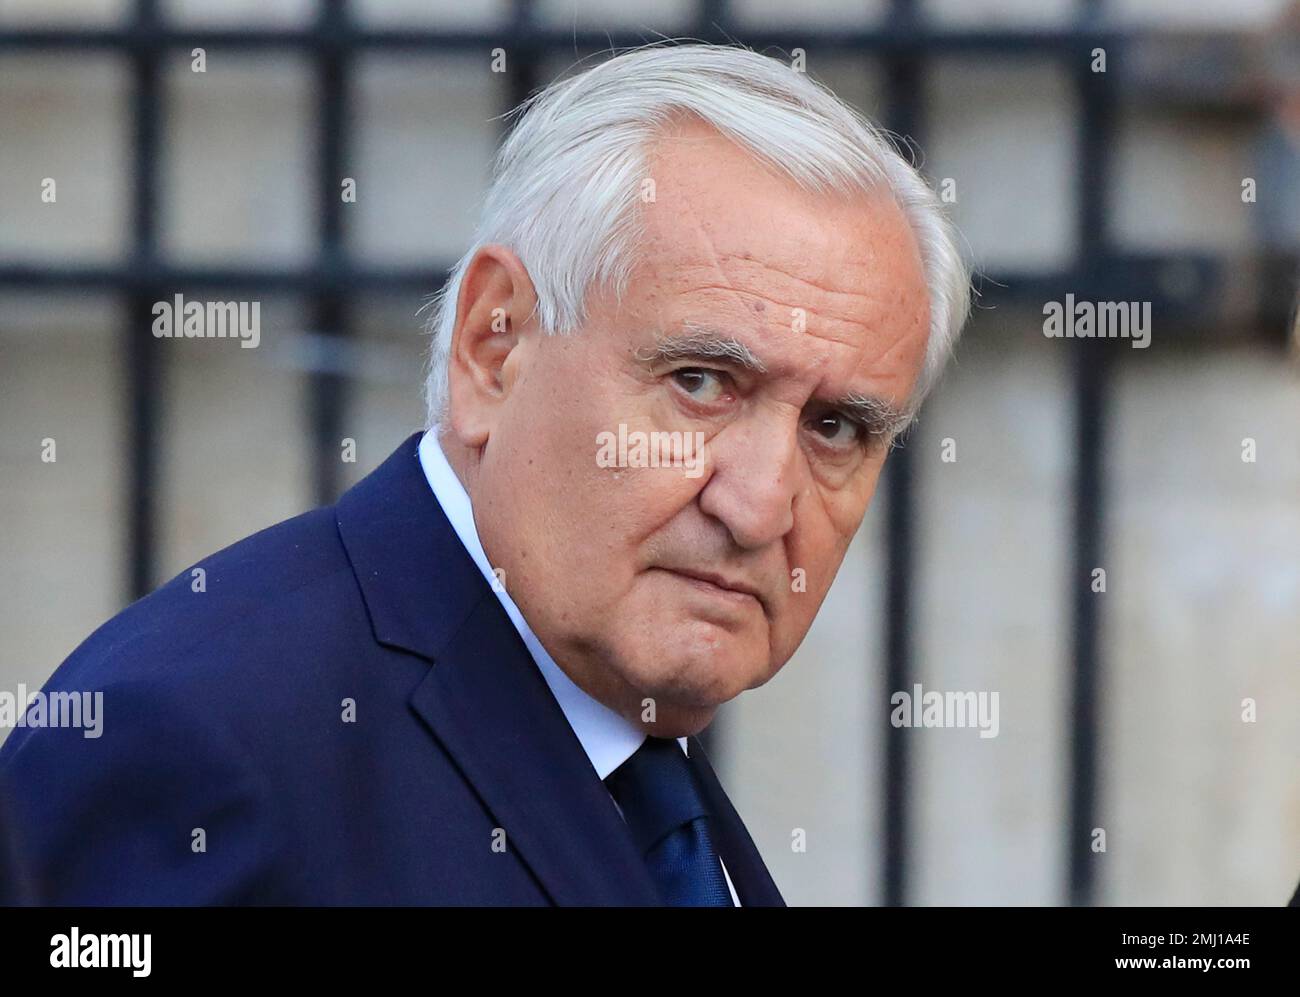 Former French Prime Minister Jean-Pierre Raffarin arrives at Saint Sulpice  church in Paris, Monday, Sept. 30, 2019. Past and current heads of states  are gathering in Paris to pay tribute to former